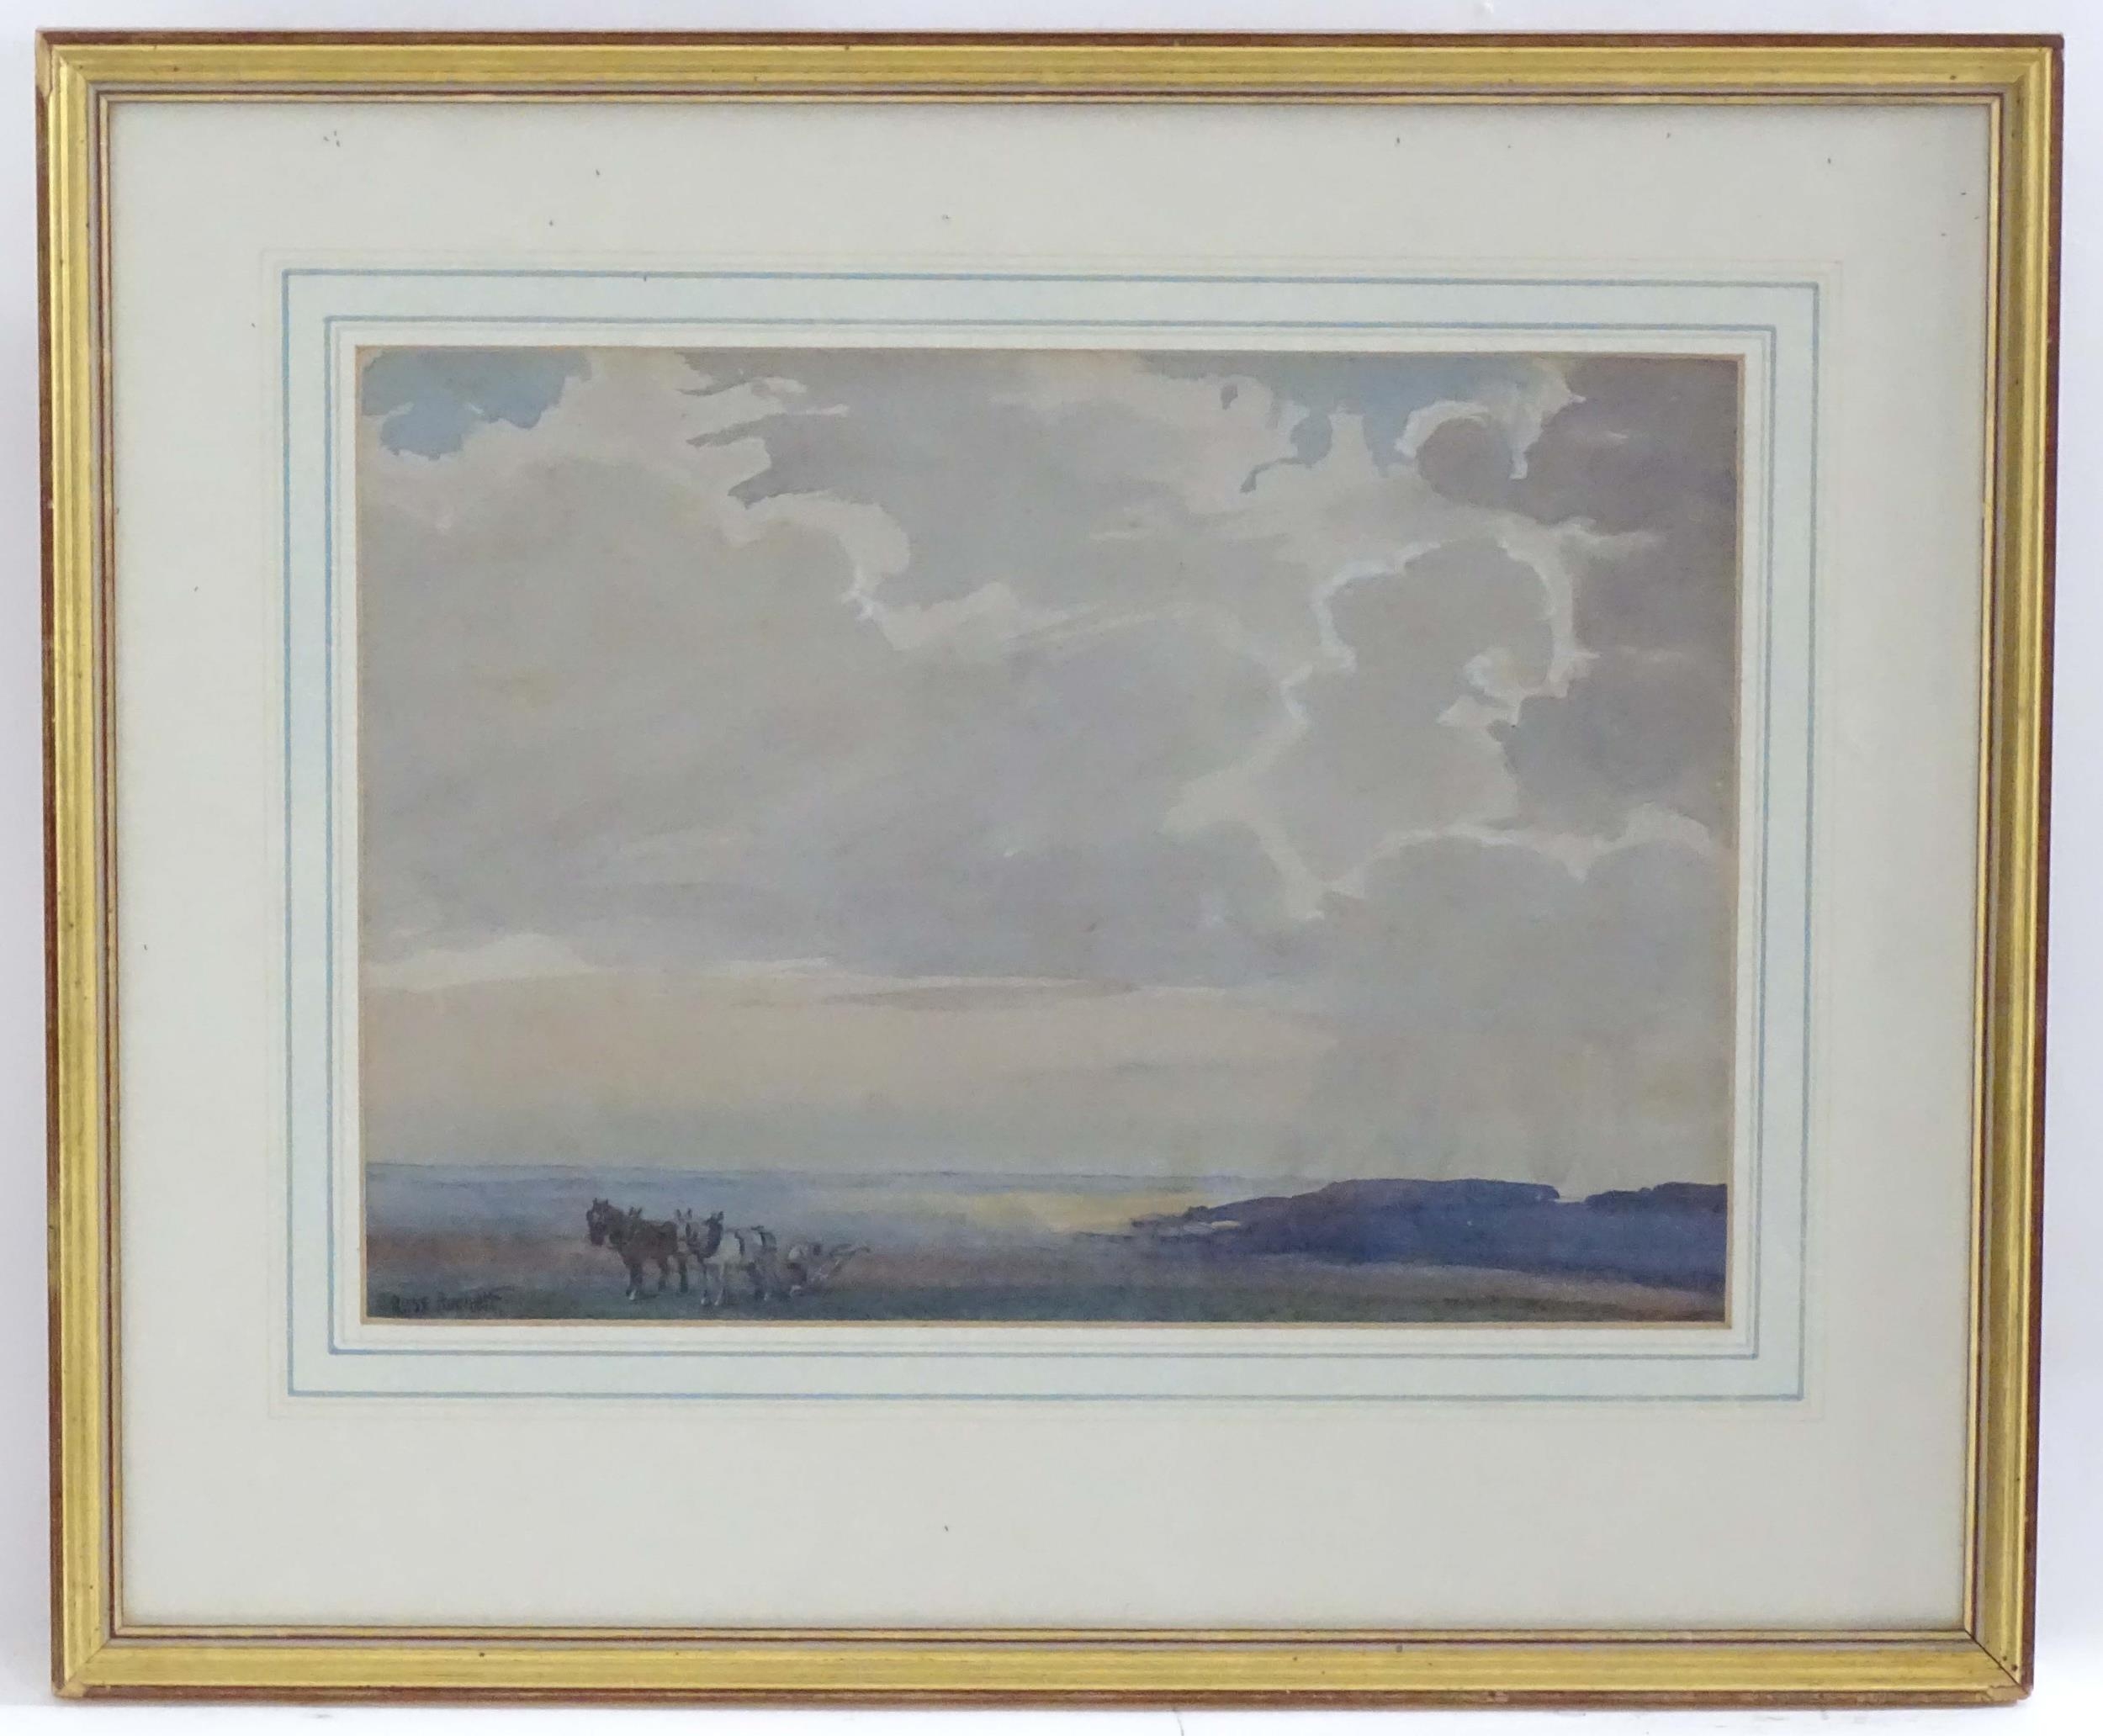 Cecil Ross Burnett (1872-1933), Watercolour, A coastal landscape with horses. Signed lower left.